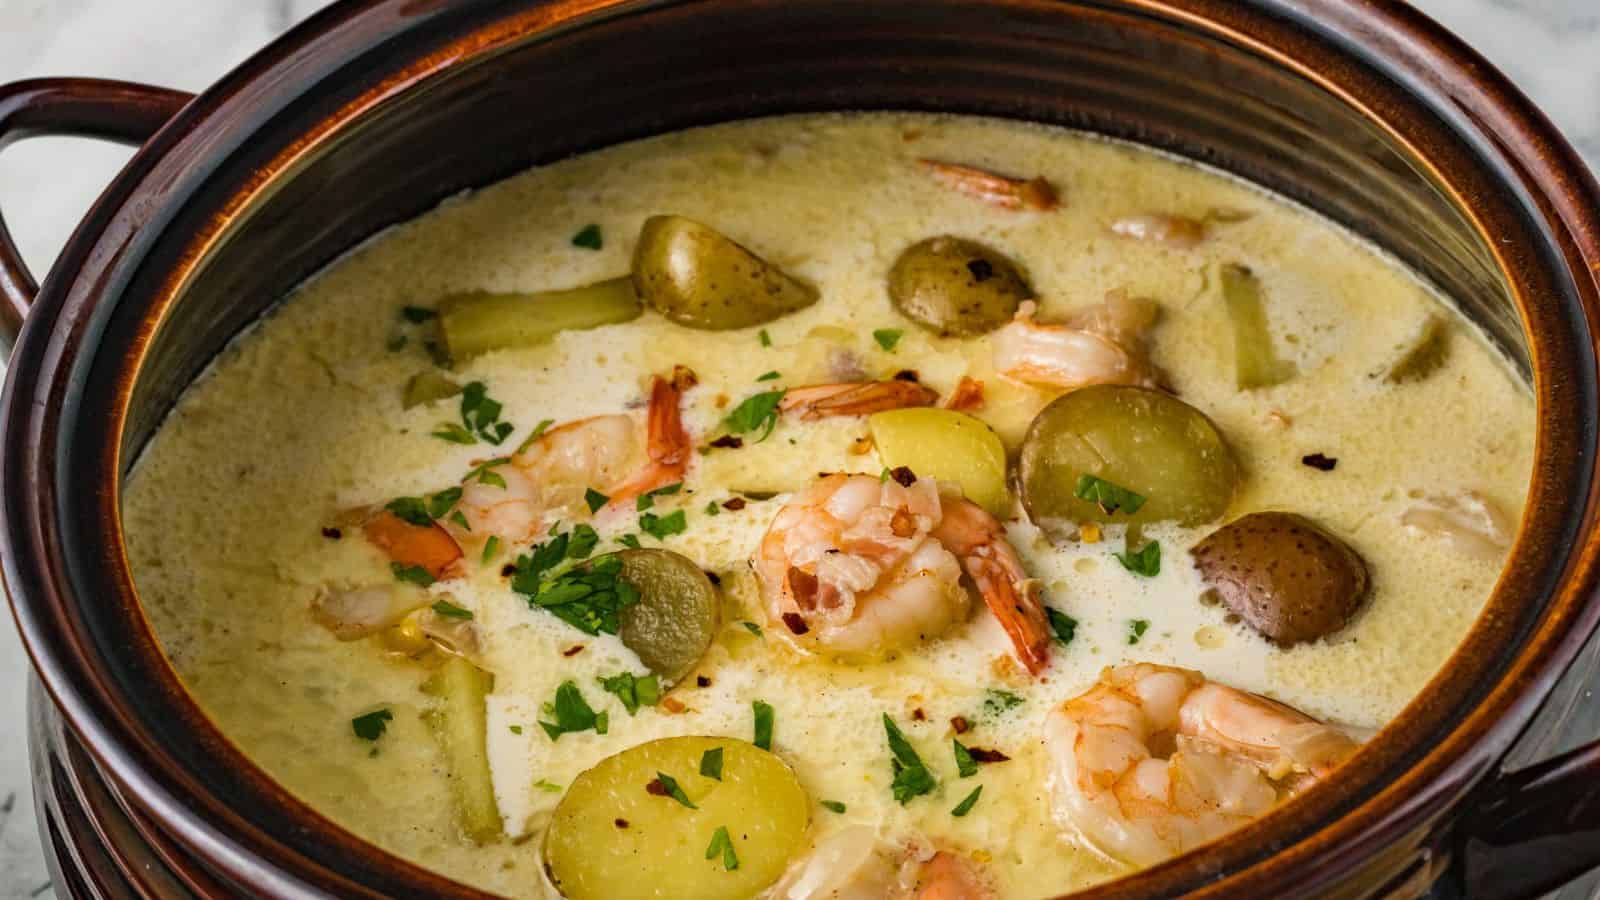 Shrimp and Potato Chowder in a large crock.